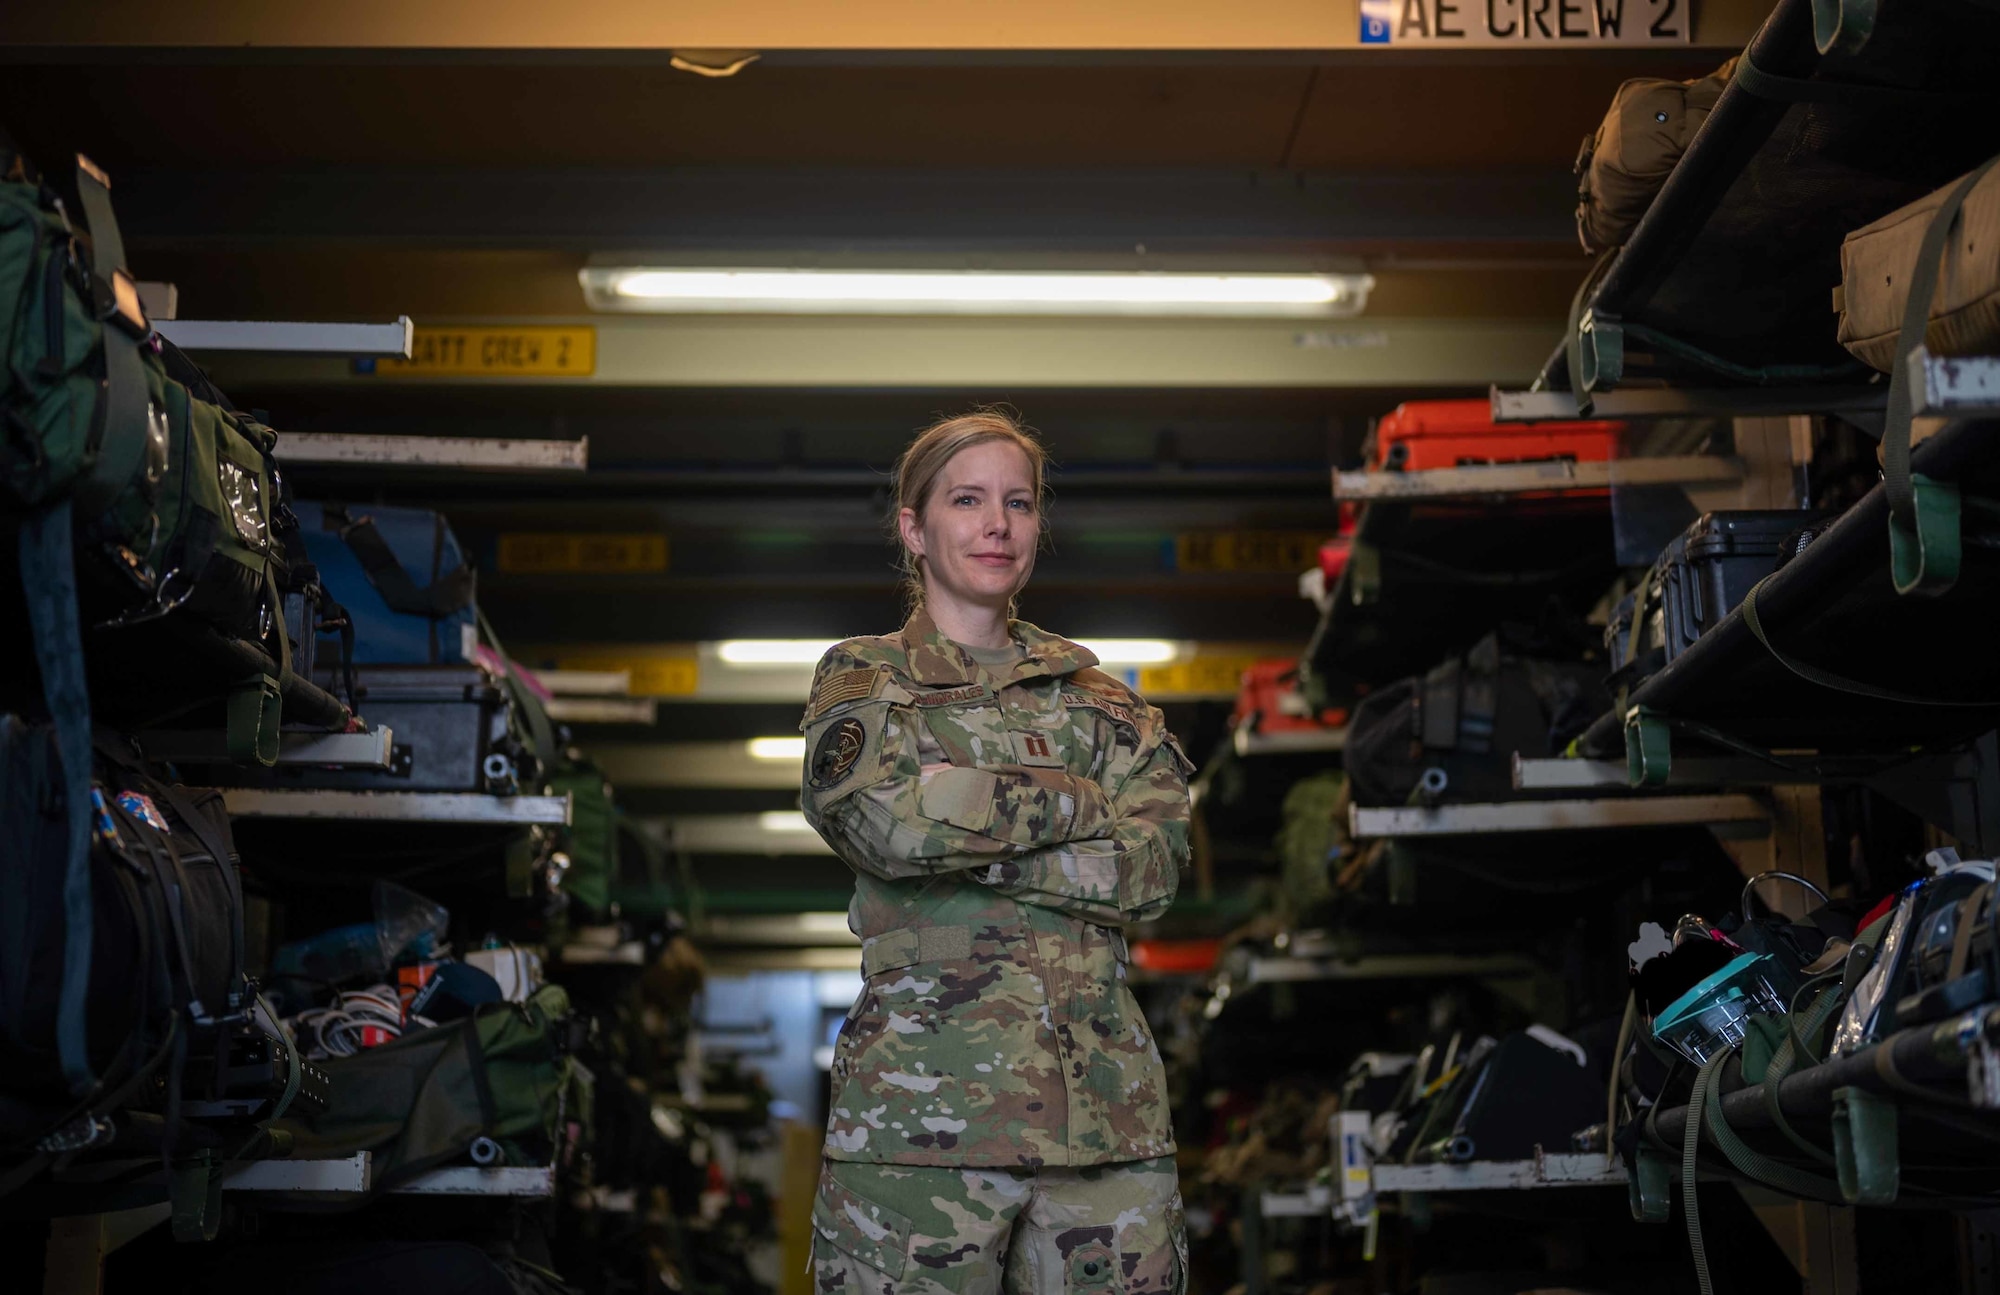 Capt. Keri Lord-Morales, 10th Expeditionary Aeromedical Evacuation Flight flight nurse, poses for a photo with medical supplies at Ramstein Air Base, Germany, Mar. 14, 2022. Lord-Morales is deployed to the 10th EAEF, attached to the 721st Mobility Support Squadron, one of ten squadrons under Air Mobility Command’s 521st Air Mobility Operations Wing. Both the squadron and wing headquarters are tenant units on Ramstein AB. (U.S. Air Force photo by Senior Airman Faith Schaefer)